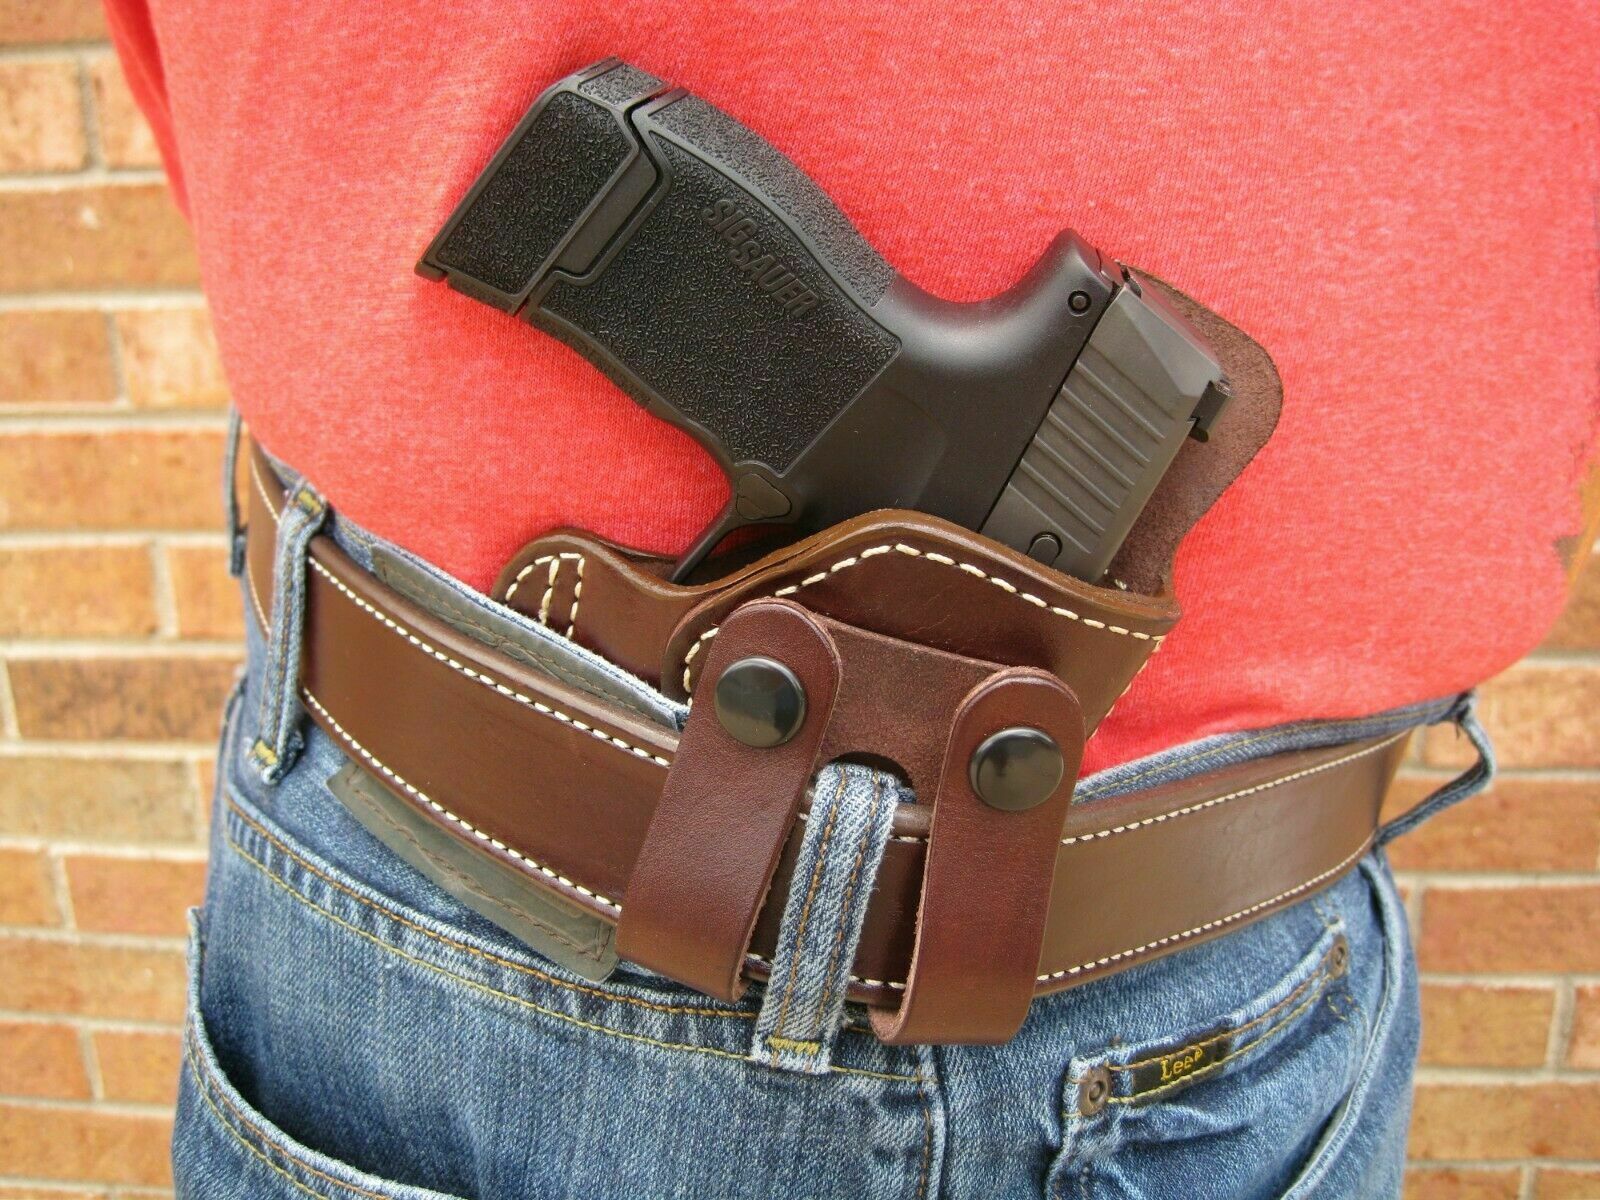 Desert Eagle 1911 5" IWB Leather In Waistband Concealed Carry Holster BLACK RH 